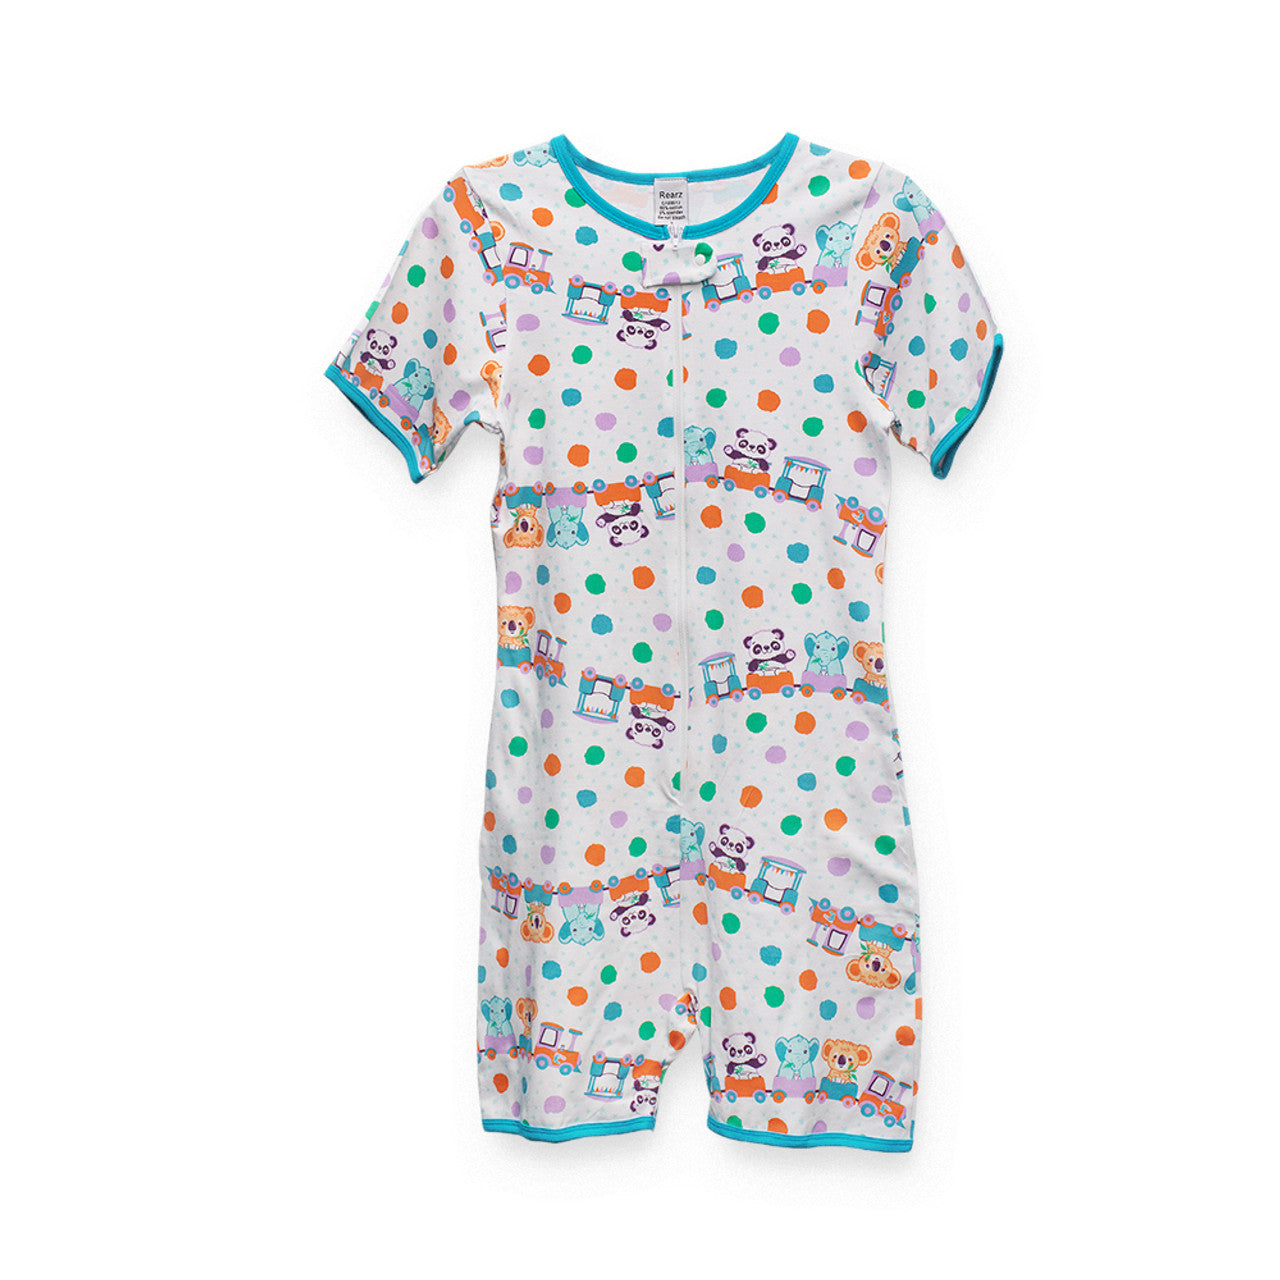 The Critter Caboose Rearz Printed Playsuit.